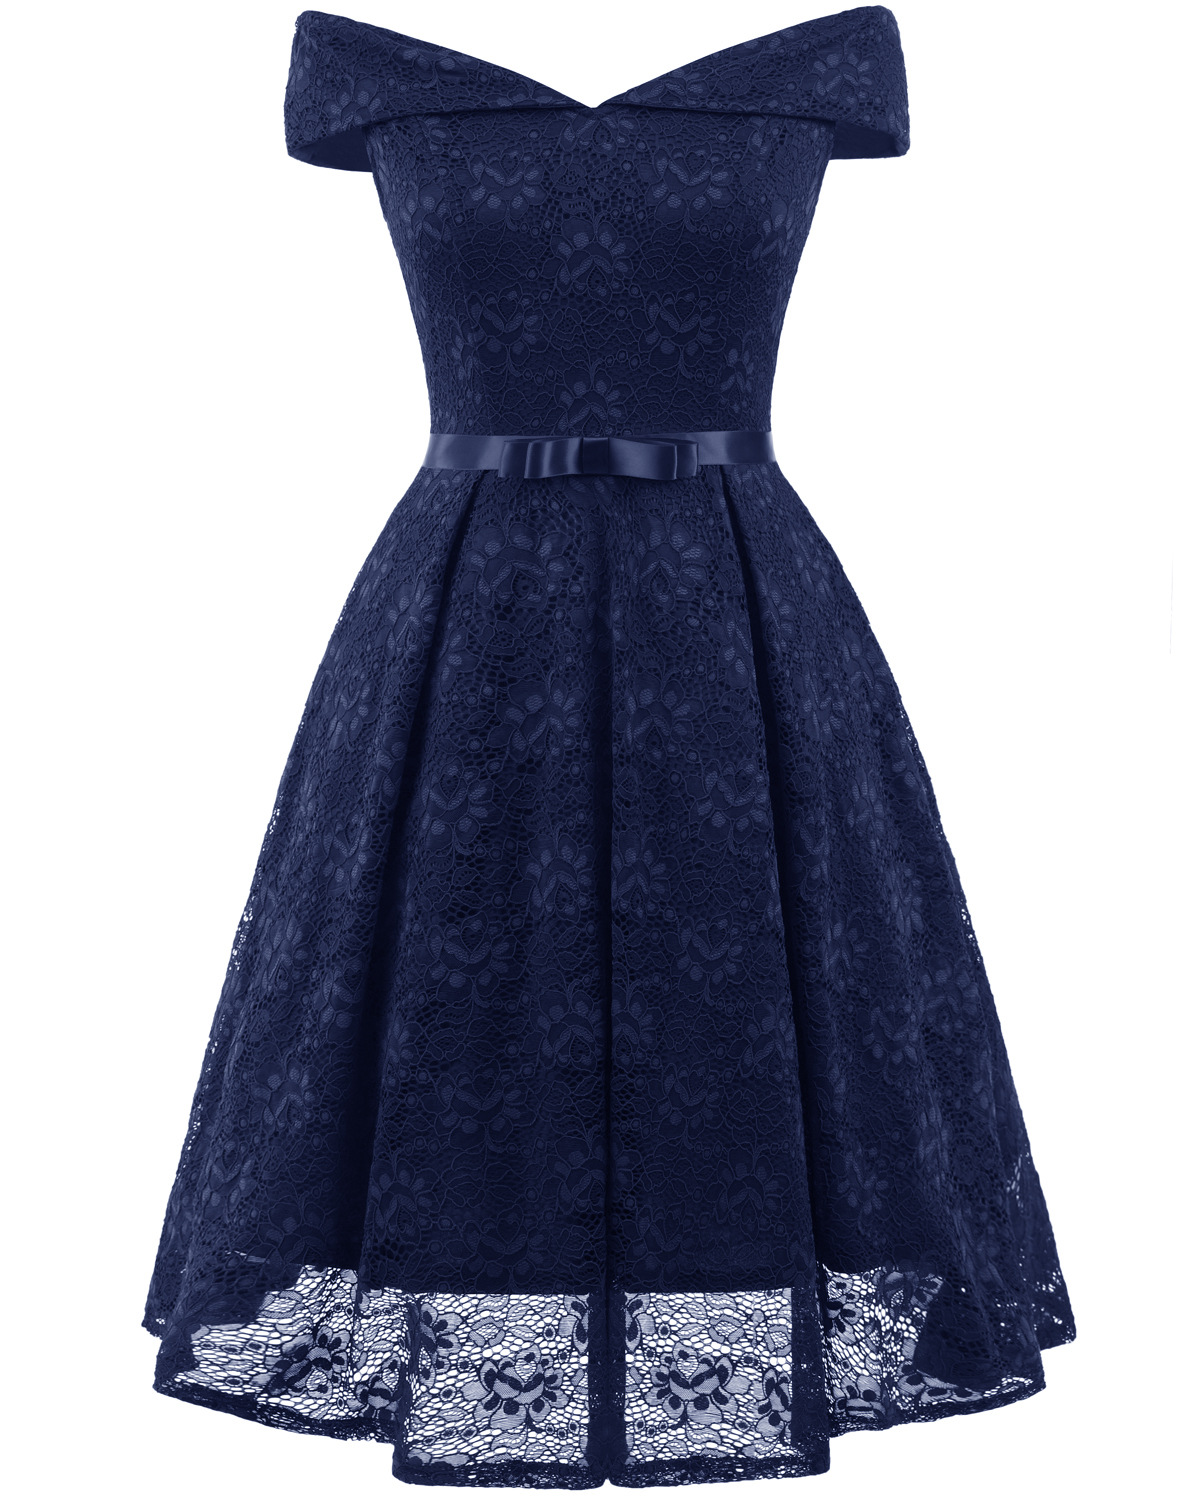 Fashion Navy Blue Lace Dress A Line Women Bridesmaid Party Gowns Soft Lace Homecoming Maix Dresses . Mini Party Gowns ,wedding Guest Gowns